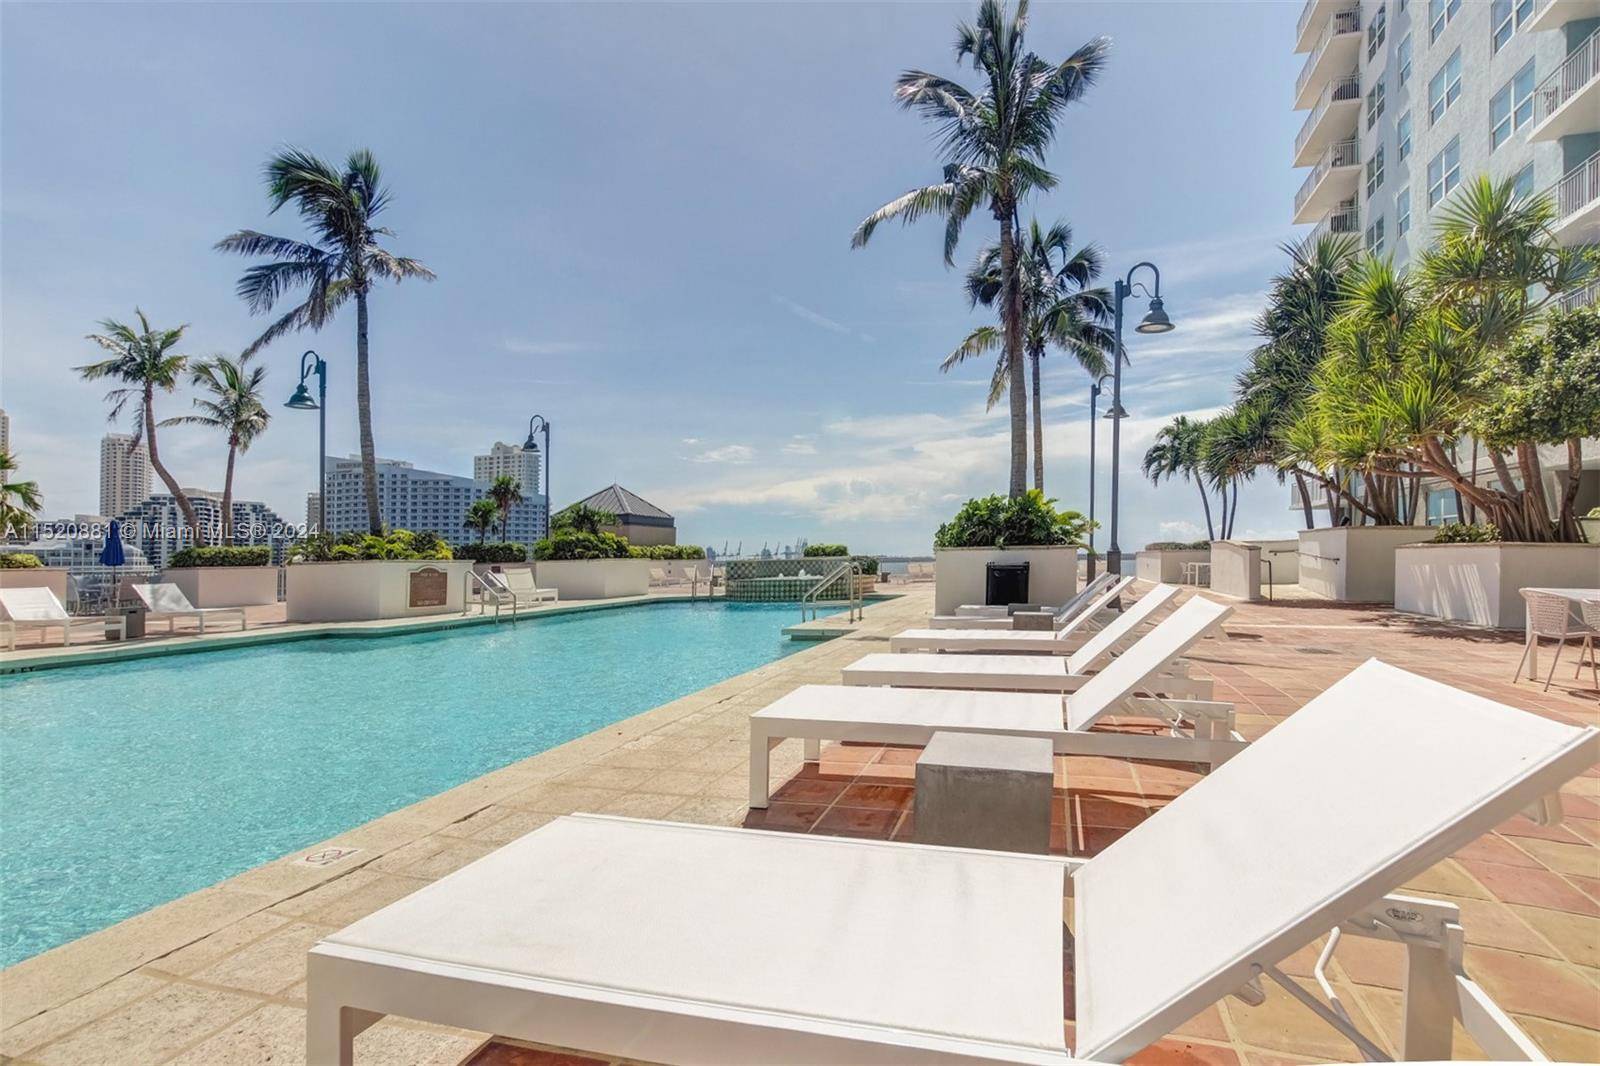 AVAILABLE 03 02. The Yacht Club Brickell is a luxury rental community on the water edge of Downtown Miami's cosmopolitan Brickell neighborhood.